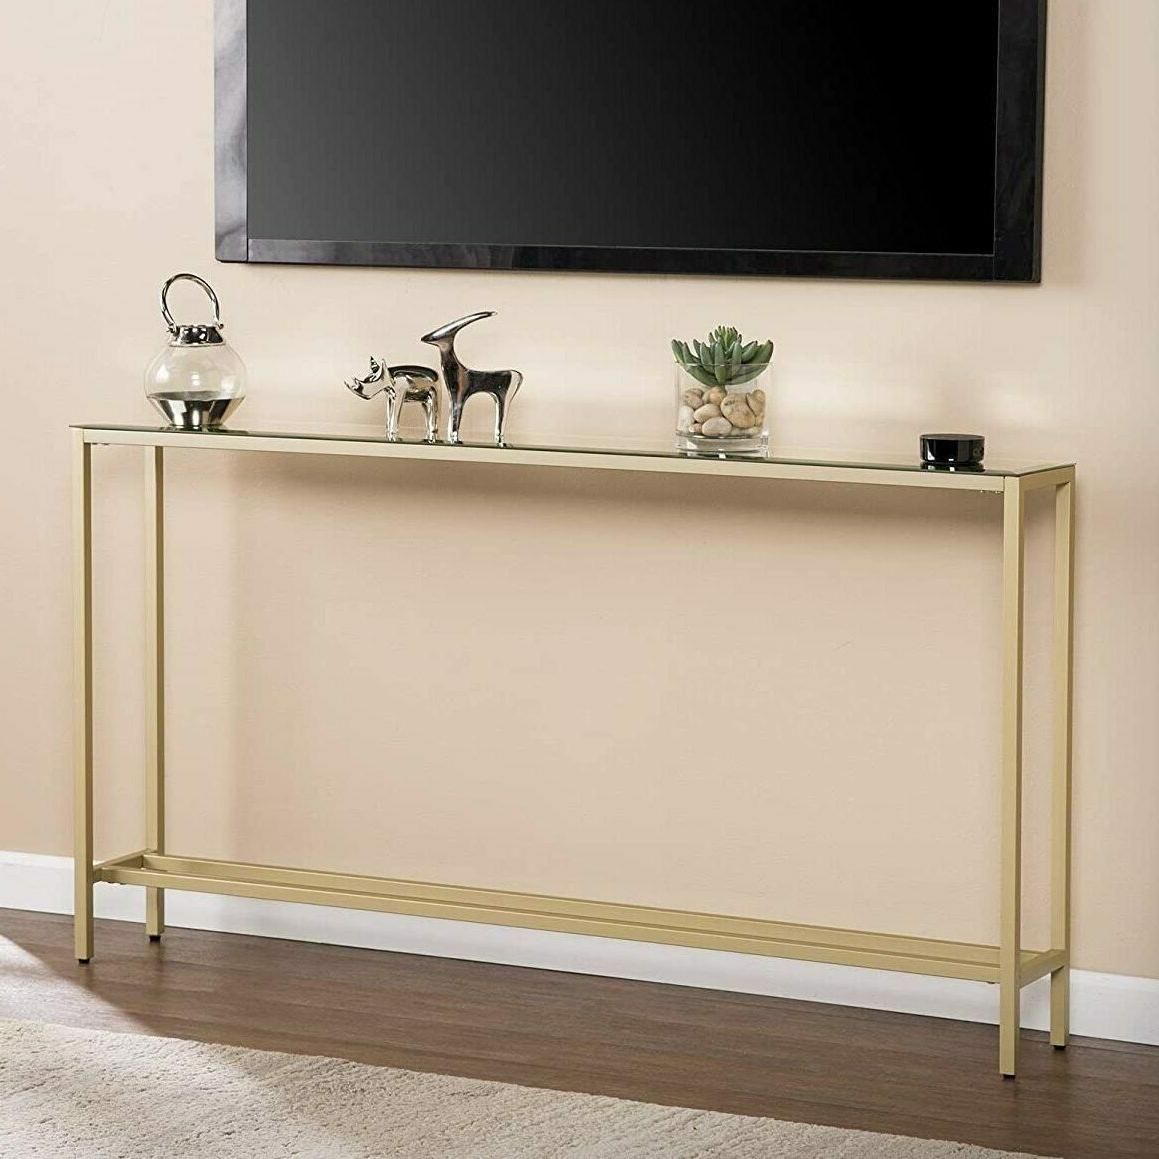 55" Slim Console Table Gold Mirror Top Glam Regarding Metallic Gold Modern Console Tables (View 4 of 20)